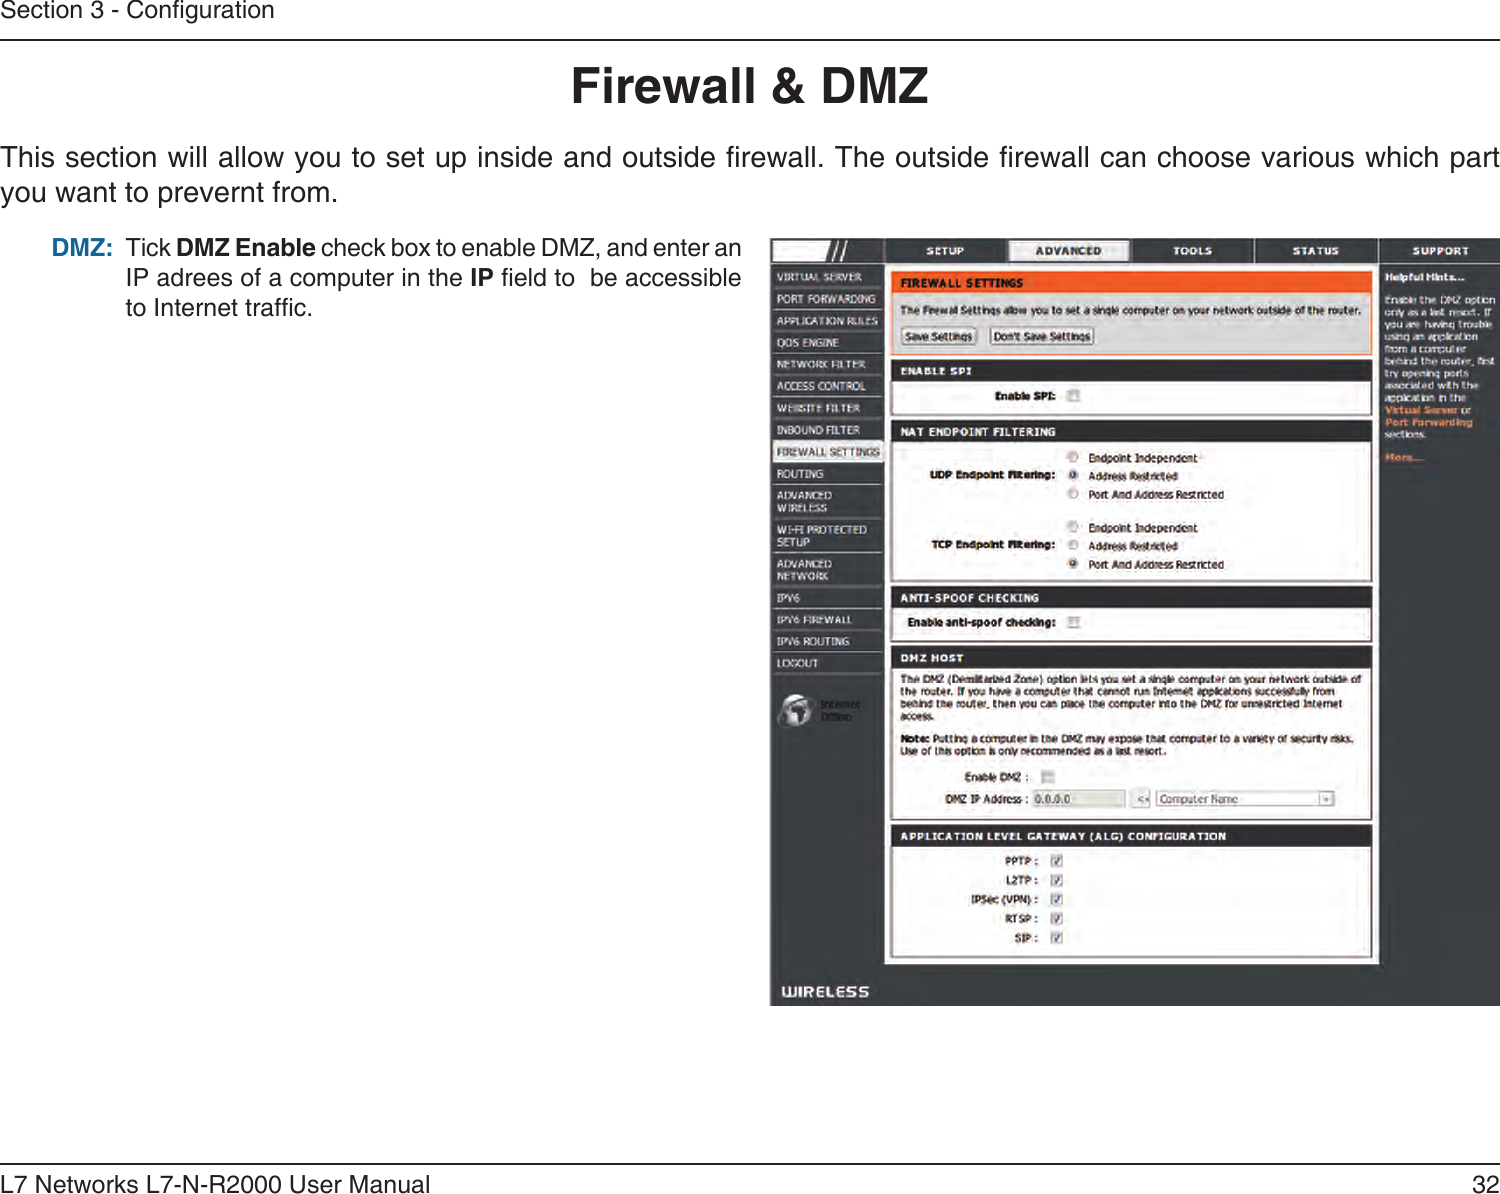 32L7 Networks L7-N-R2000 User ManualSection 3 - CongurationFirewall &amp; DMZThis section will allow you to set up inside and outside rewall. The outside rewall can choose various which part you want to prevernt from.Tick DMZ Enable check box to enable DMZ, and enter an IP adrees of a computer in the IP eld to  be accessible to Internet trafc.DMZ: